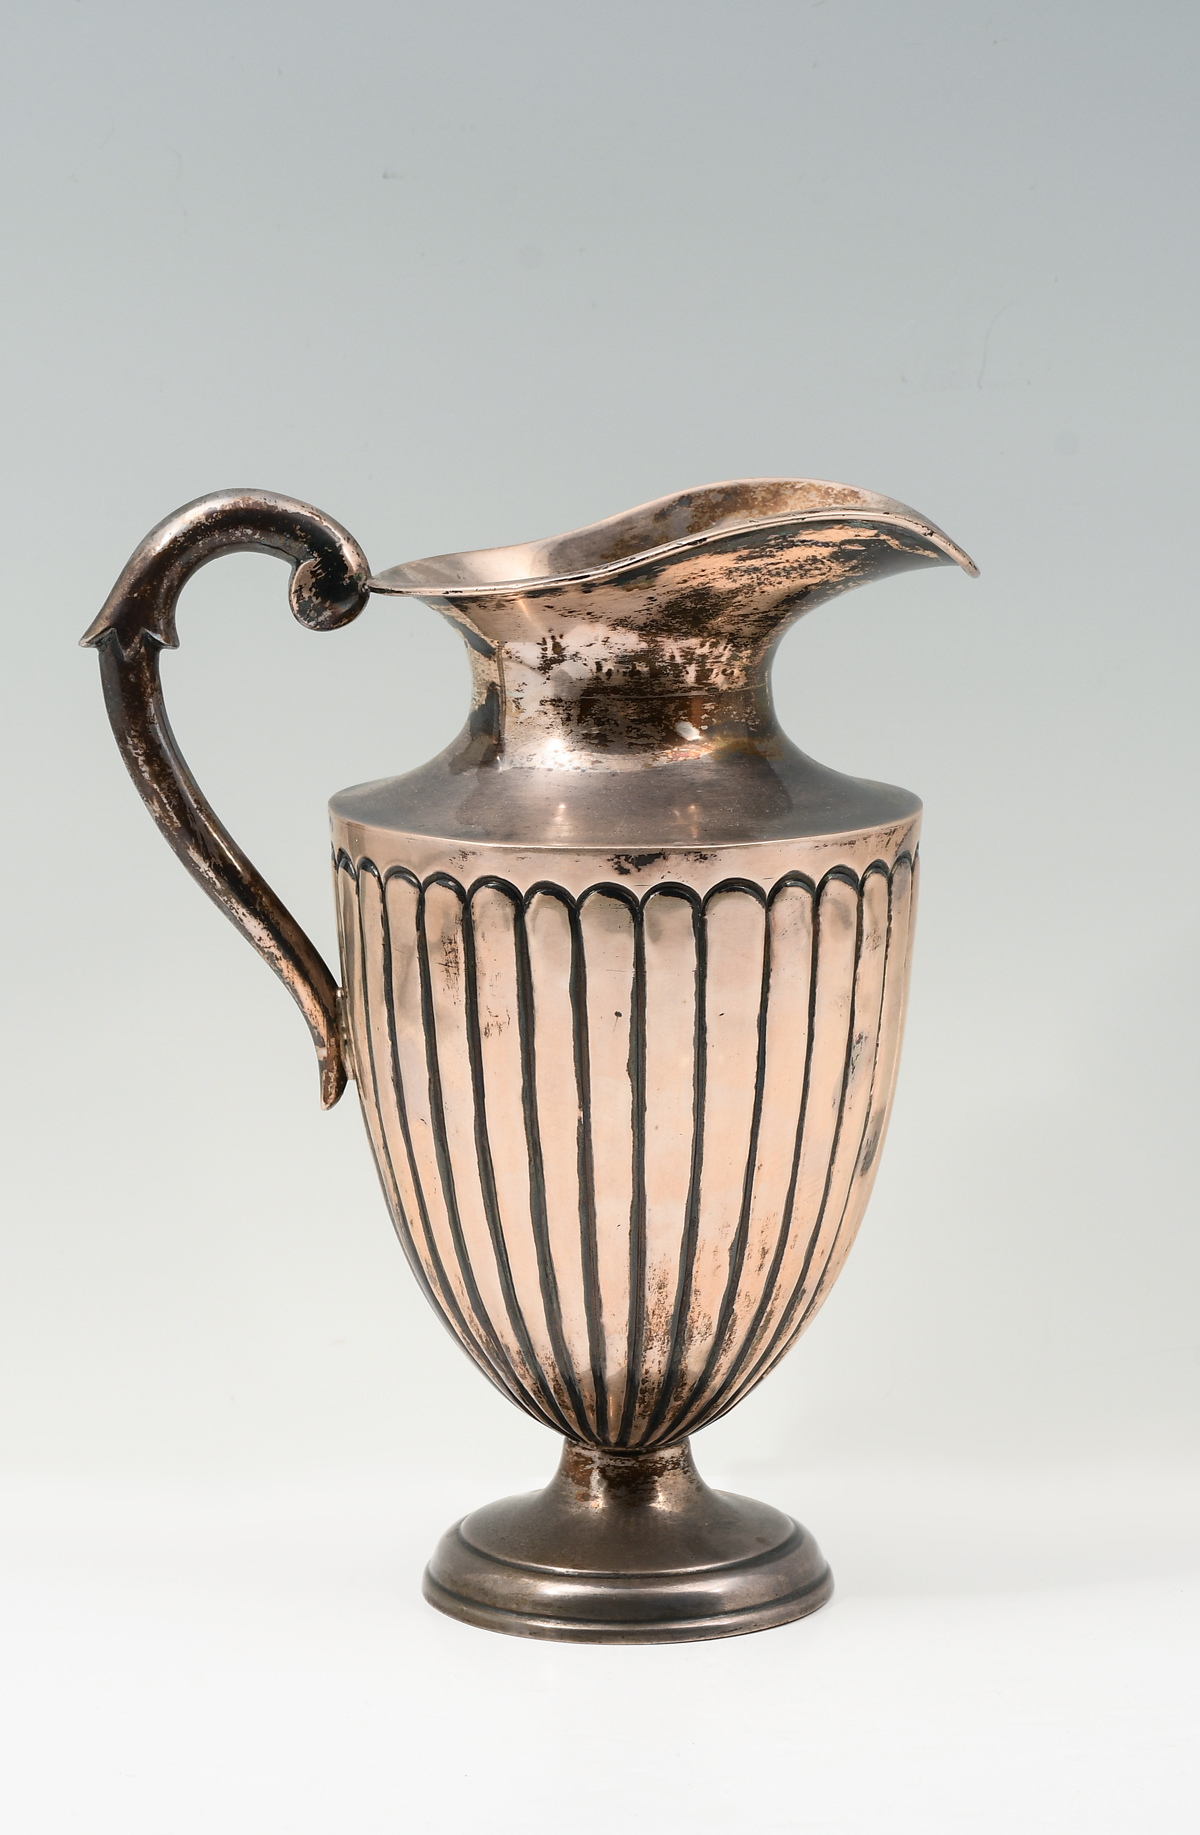 REED & BARTON STERLING SILVER PITCHER: